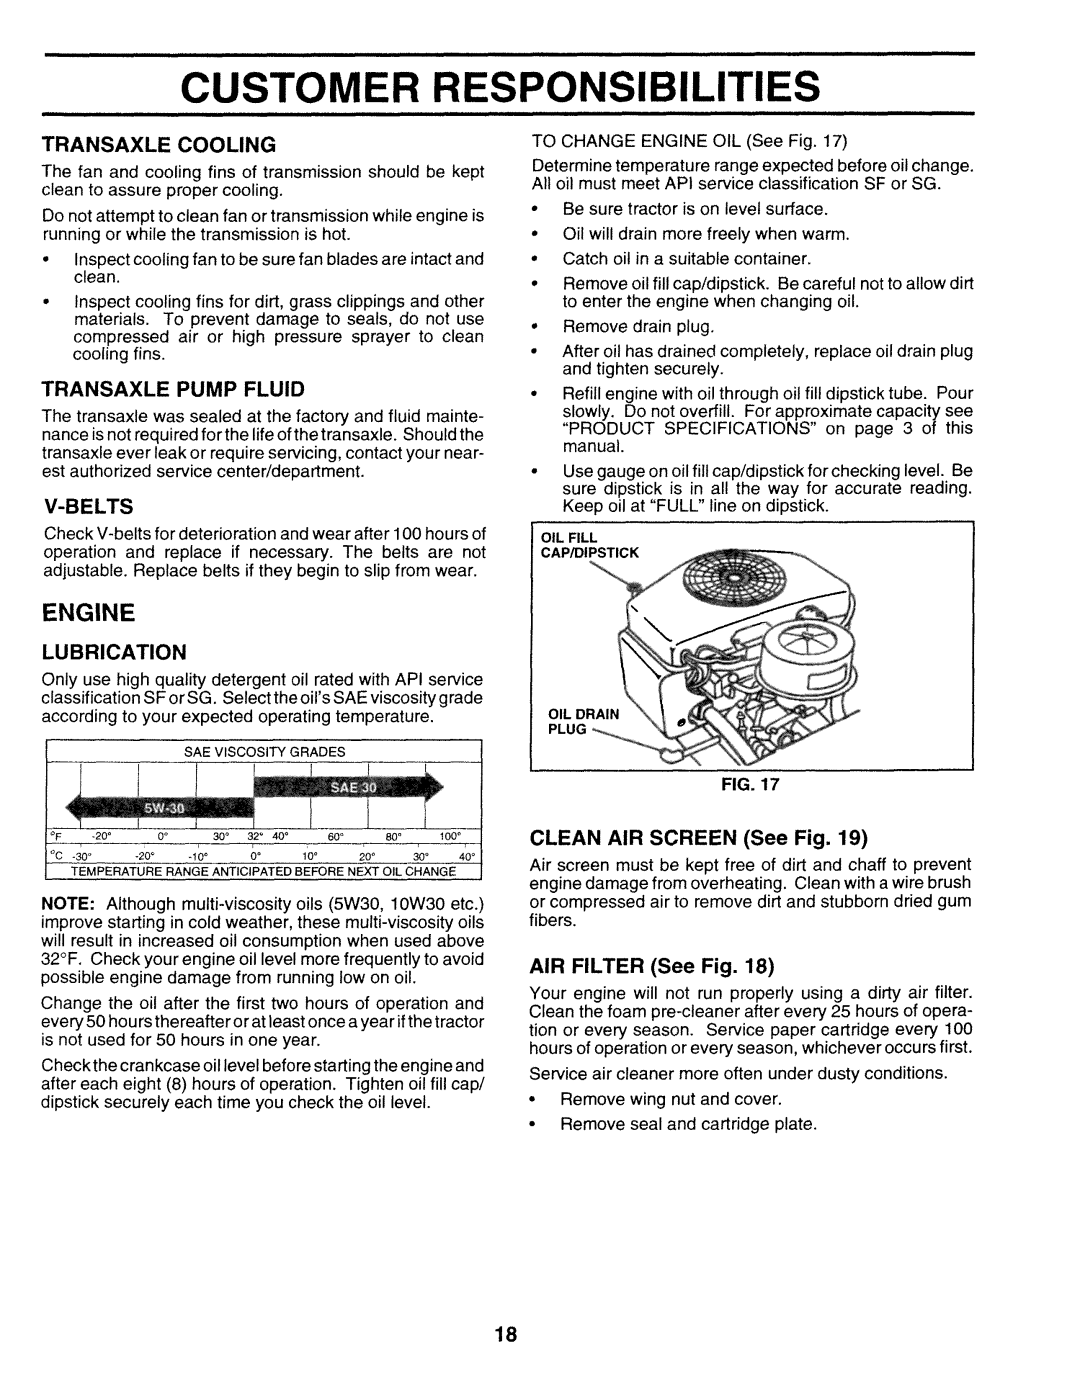 Sears 917.25271 Engine, Transaxle Cooling, Transaxle Pump Fluid, V-Belts, Lubrication, CLEAN AIR SCREEN See Fig 